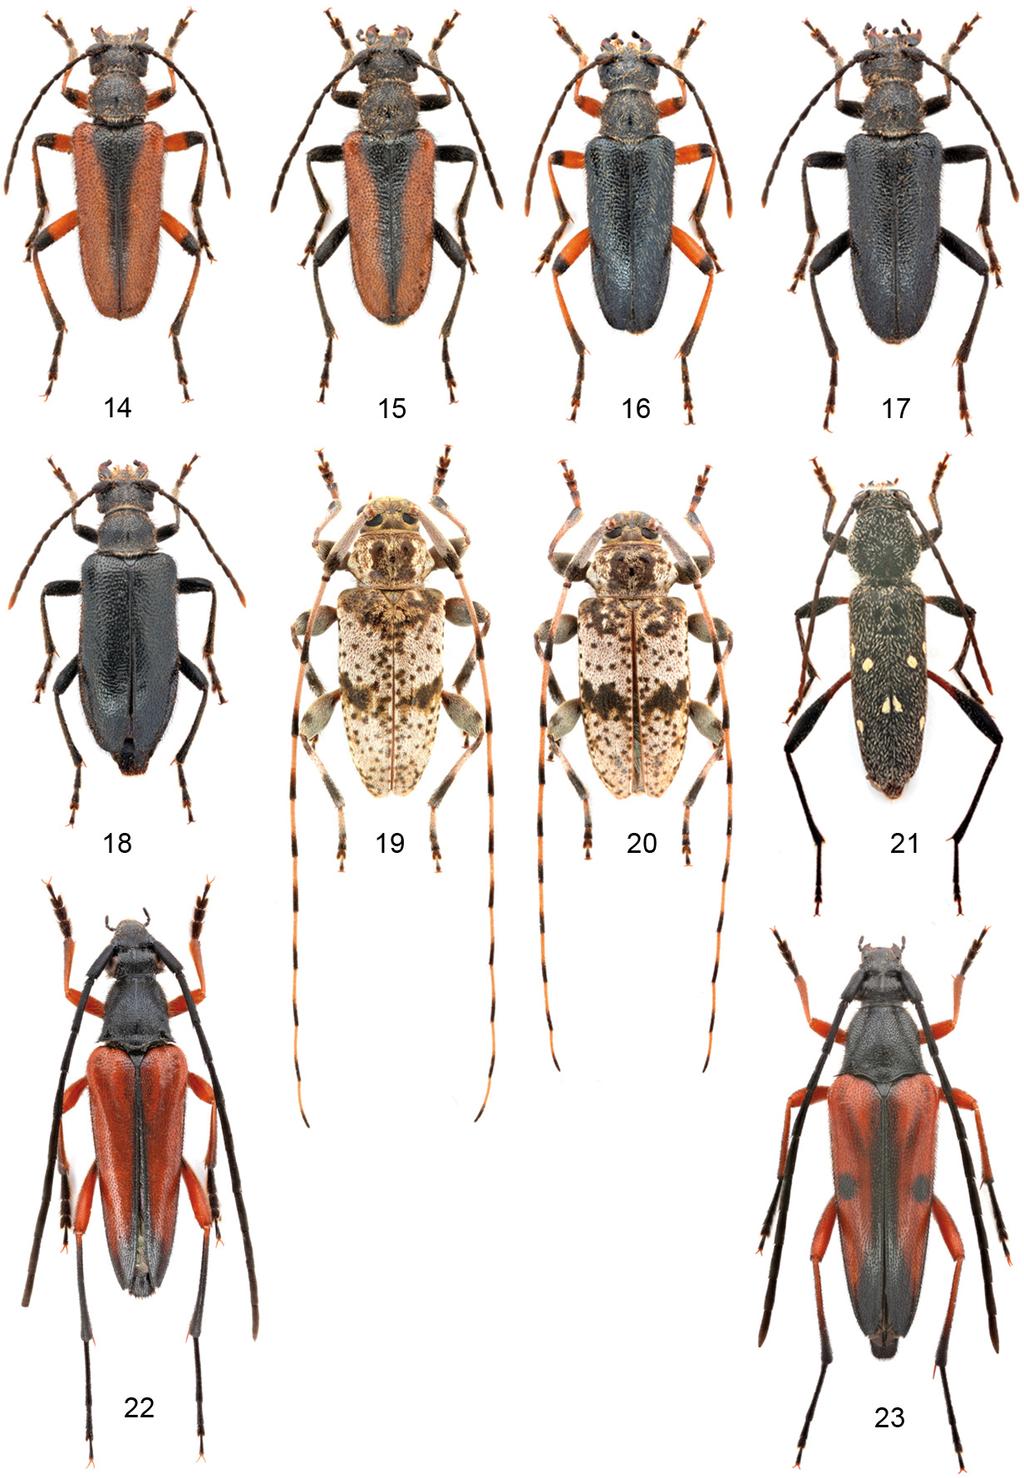 A new Alosterna and other Cerambycidae from Lebanon 29 Figs 14 23. Cerambycidae species, dorsal view: 14 17 = Cortodera colchica colchica Reitter, 1890 from Bcharre env.